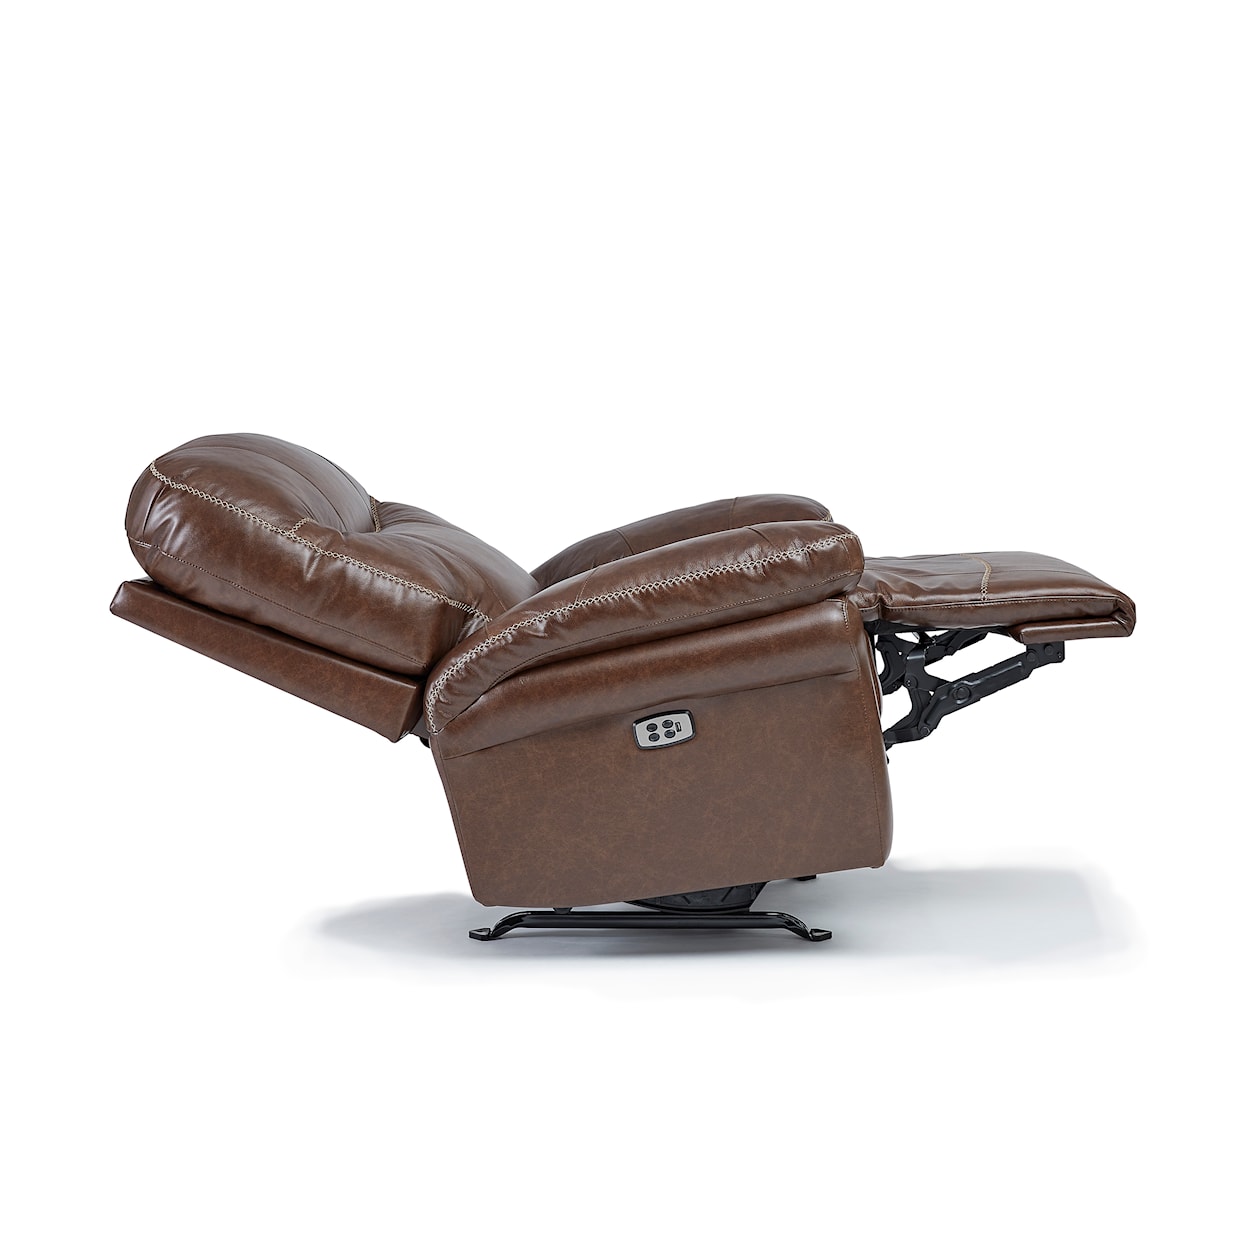 Best Home Furnishings Leya Leather Power Space Saver Recliner w/ HR